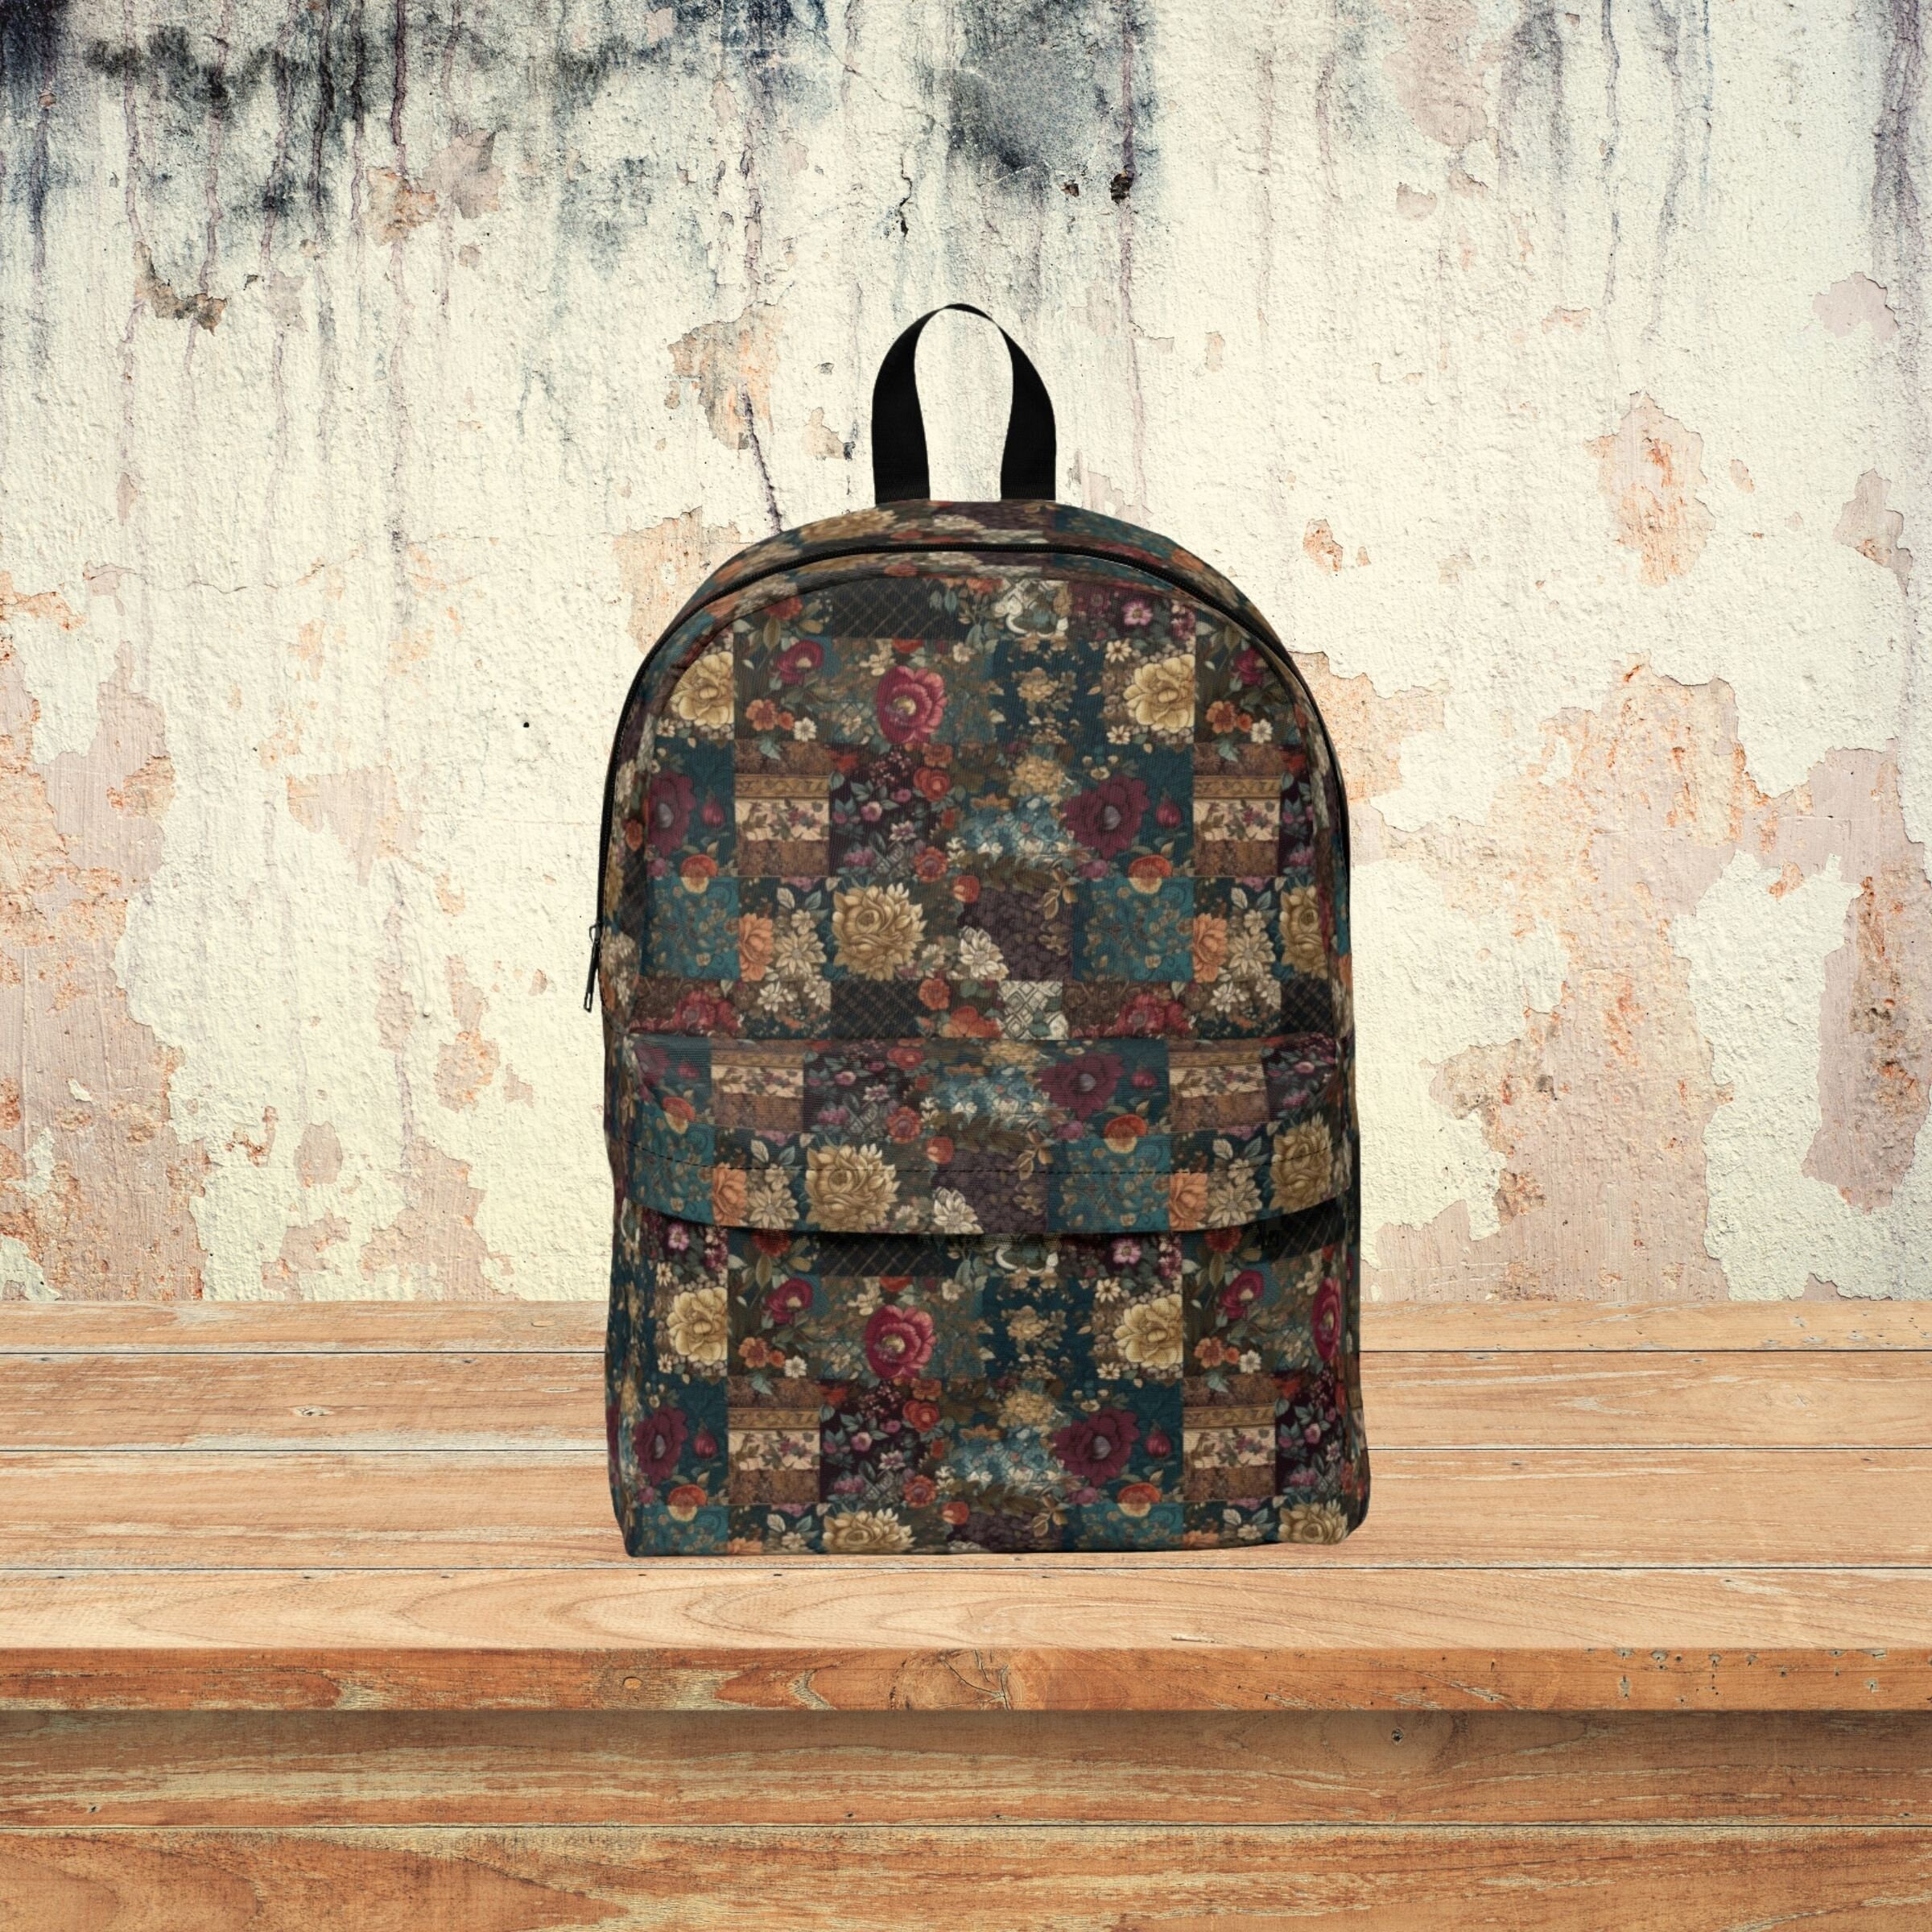 Buy 90s Grunge Tech Bag Online In India -  India